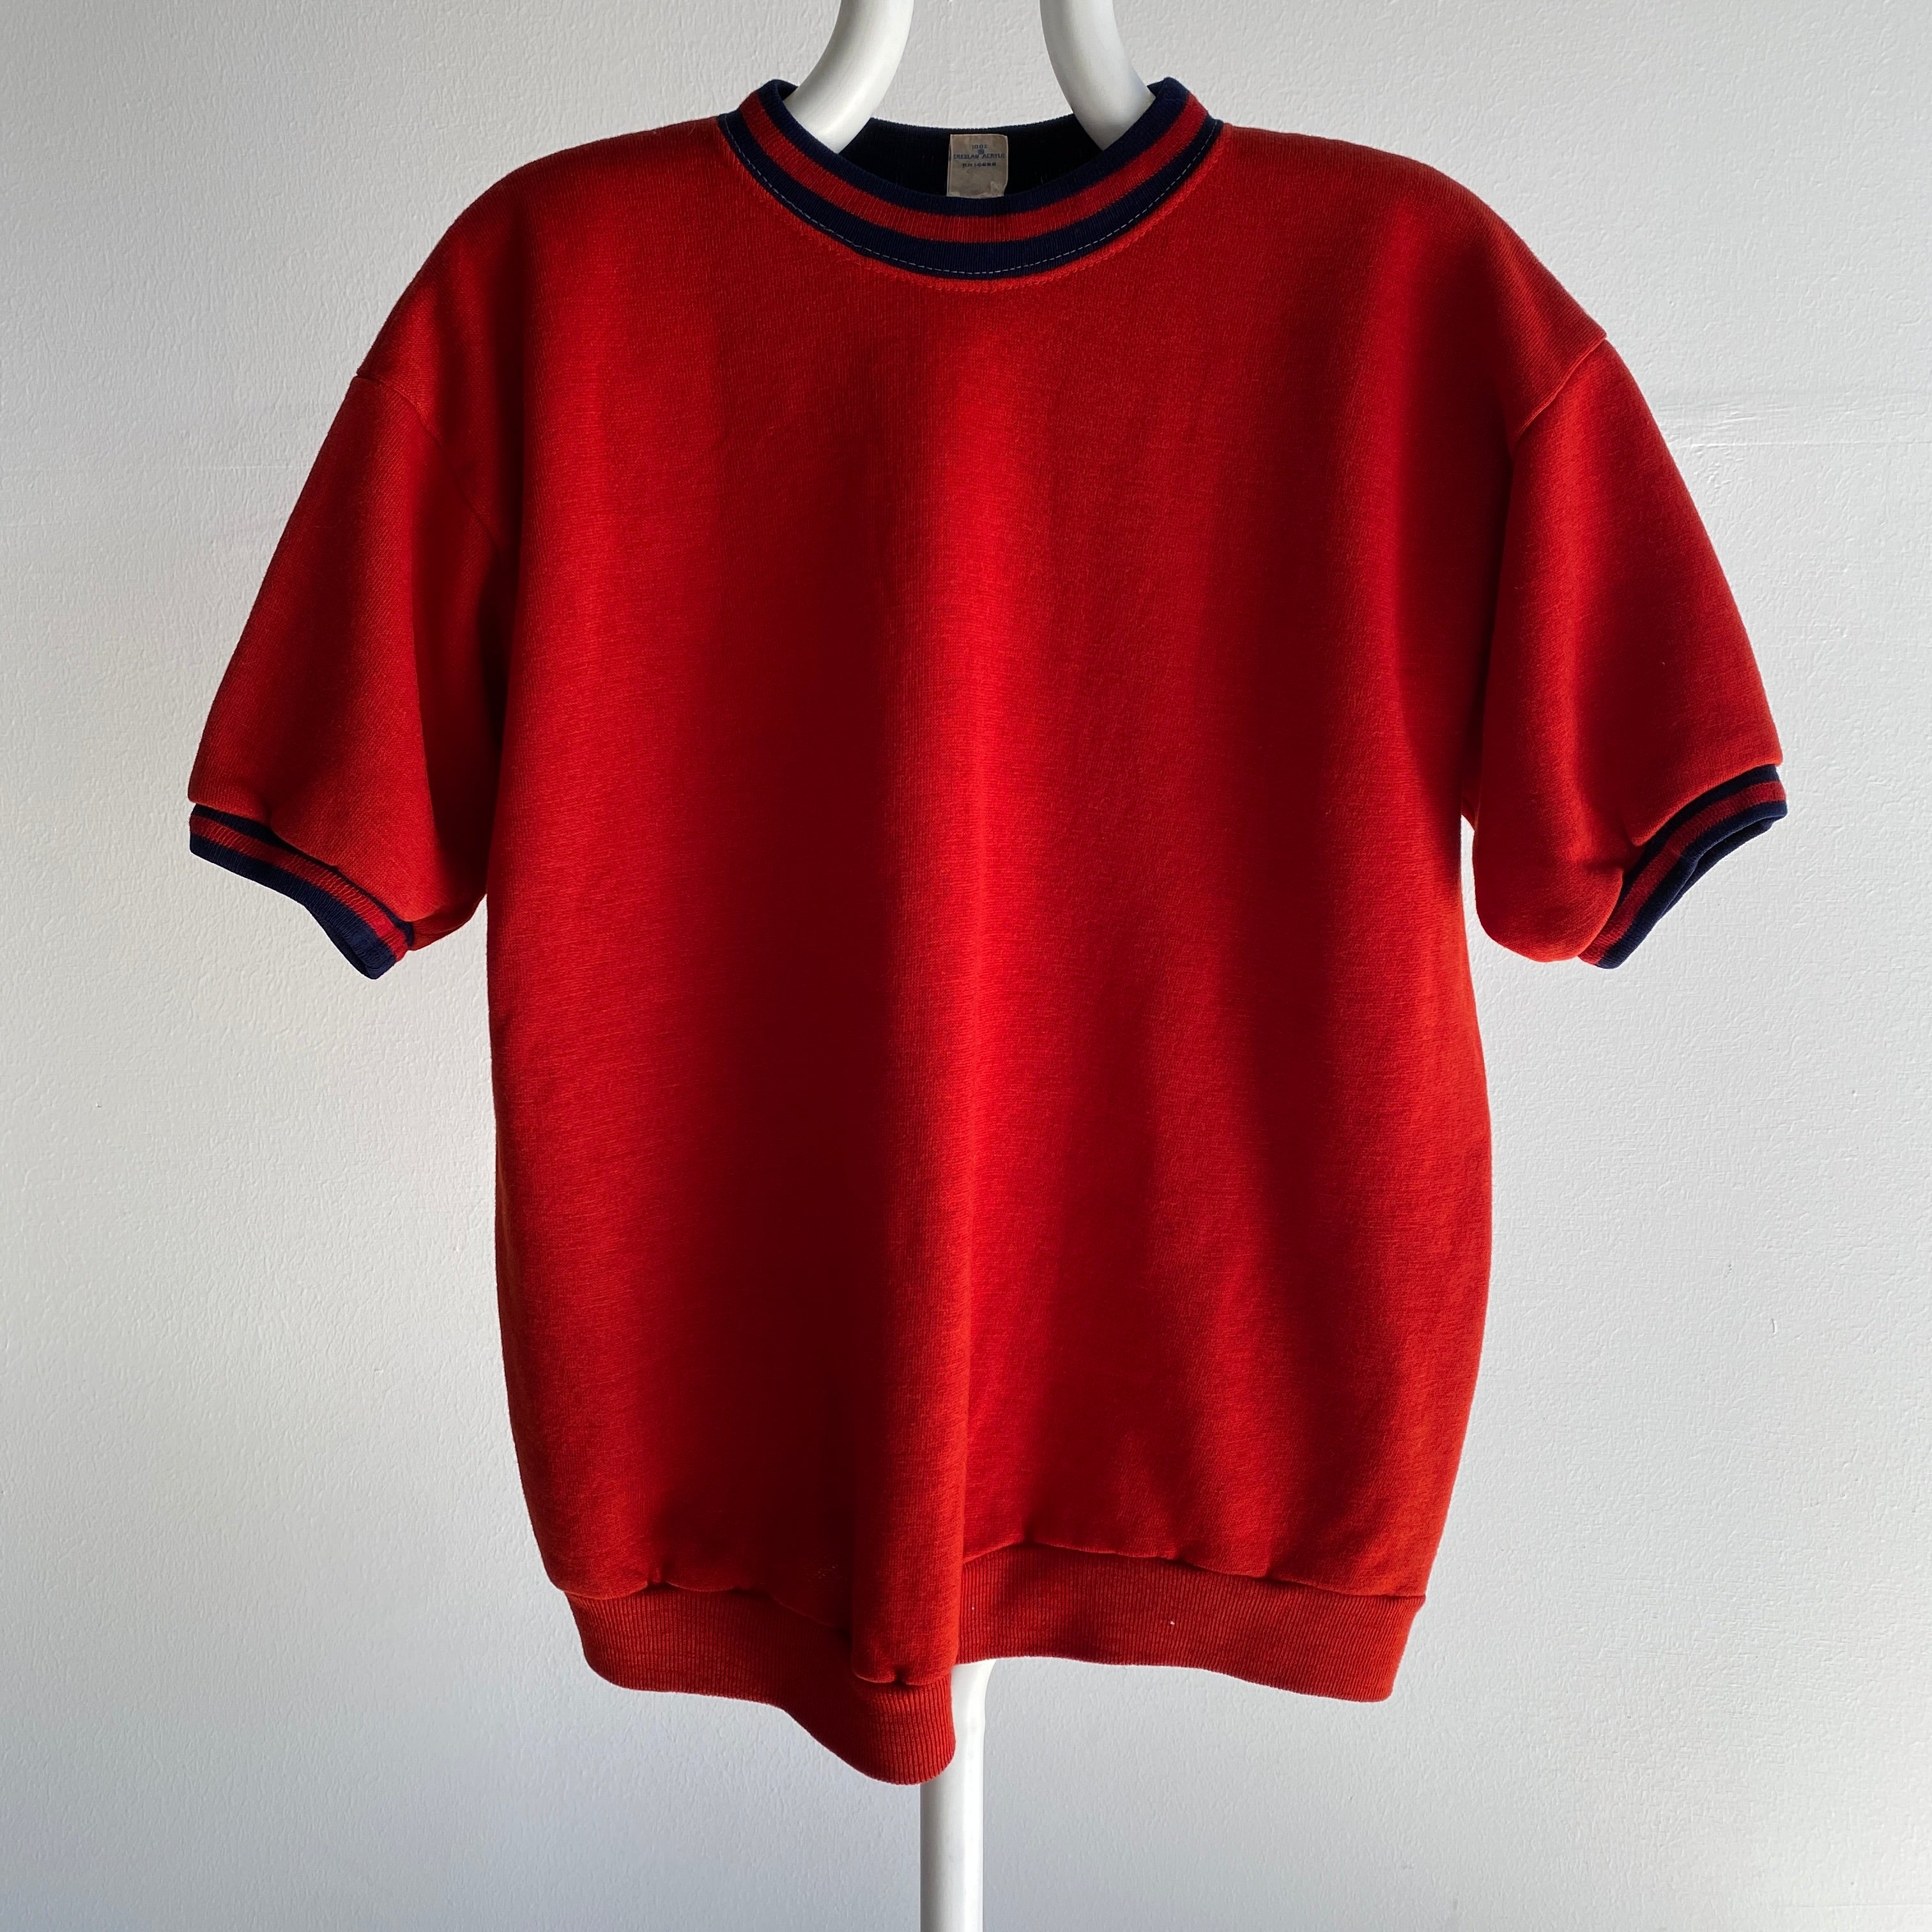 1960/70s SUPER DUPER SOFT AND SLOUCHY Rusty Red Warm Up